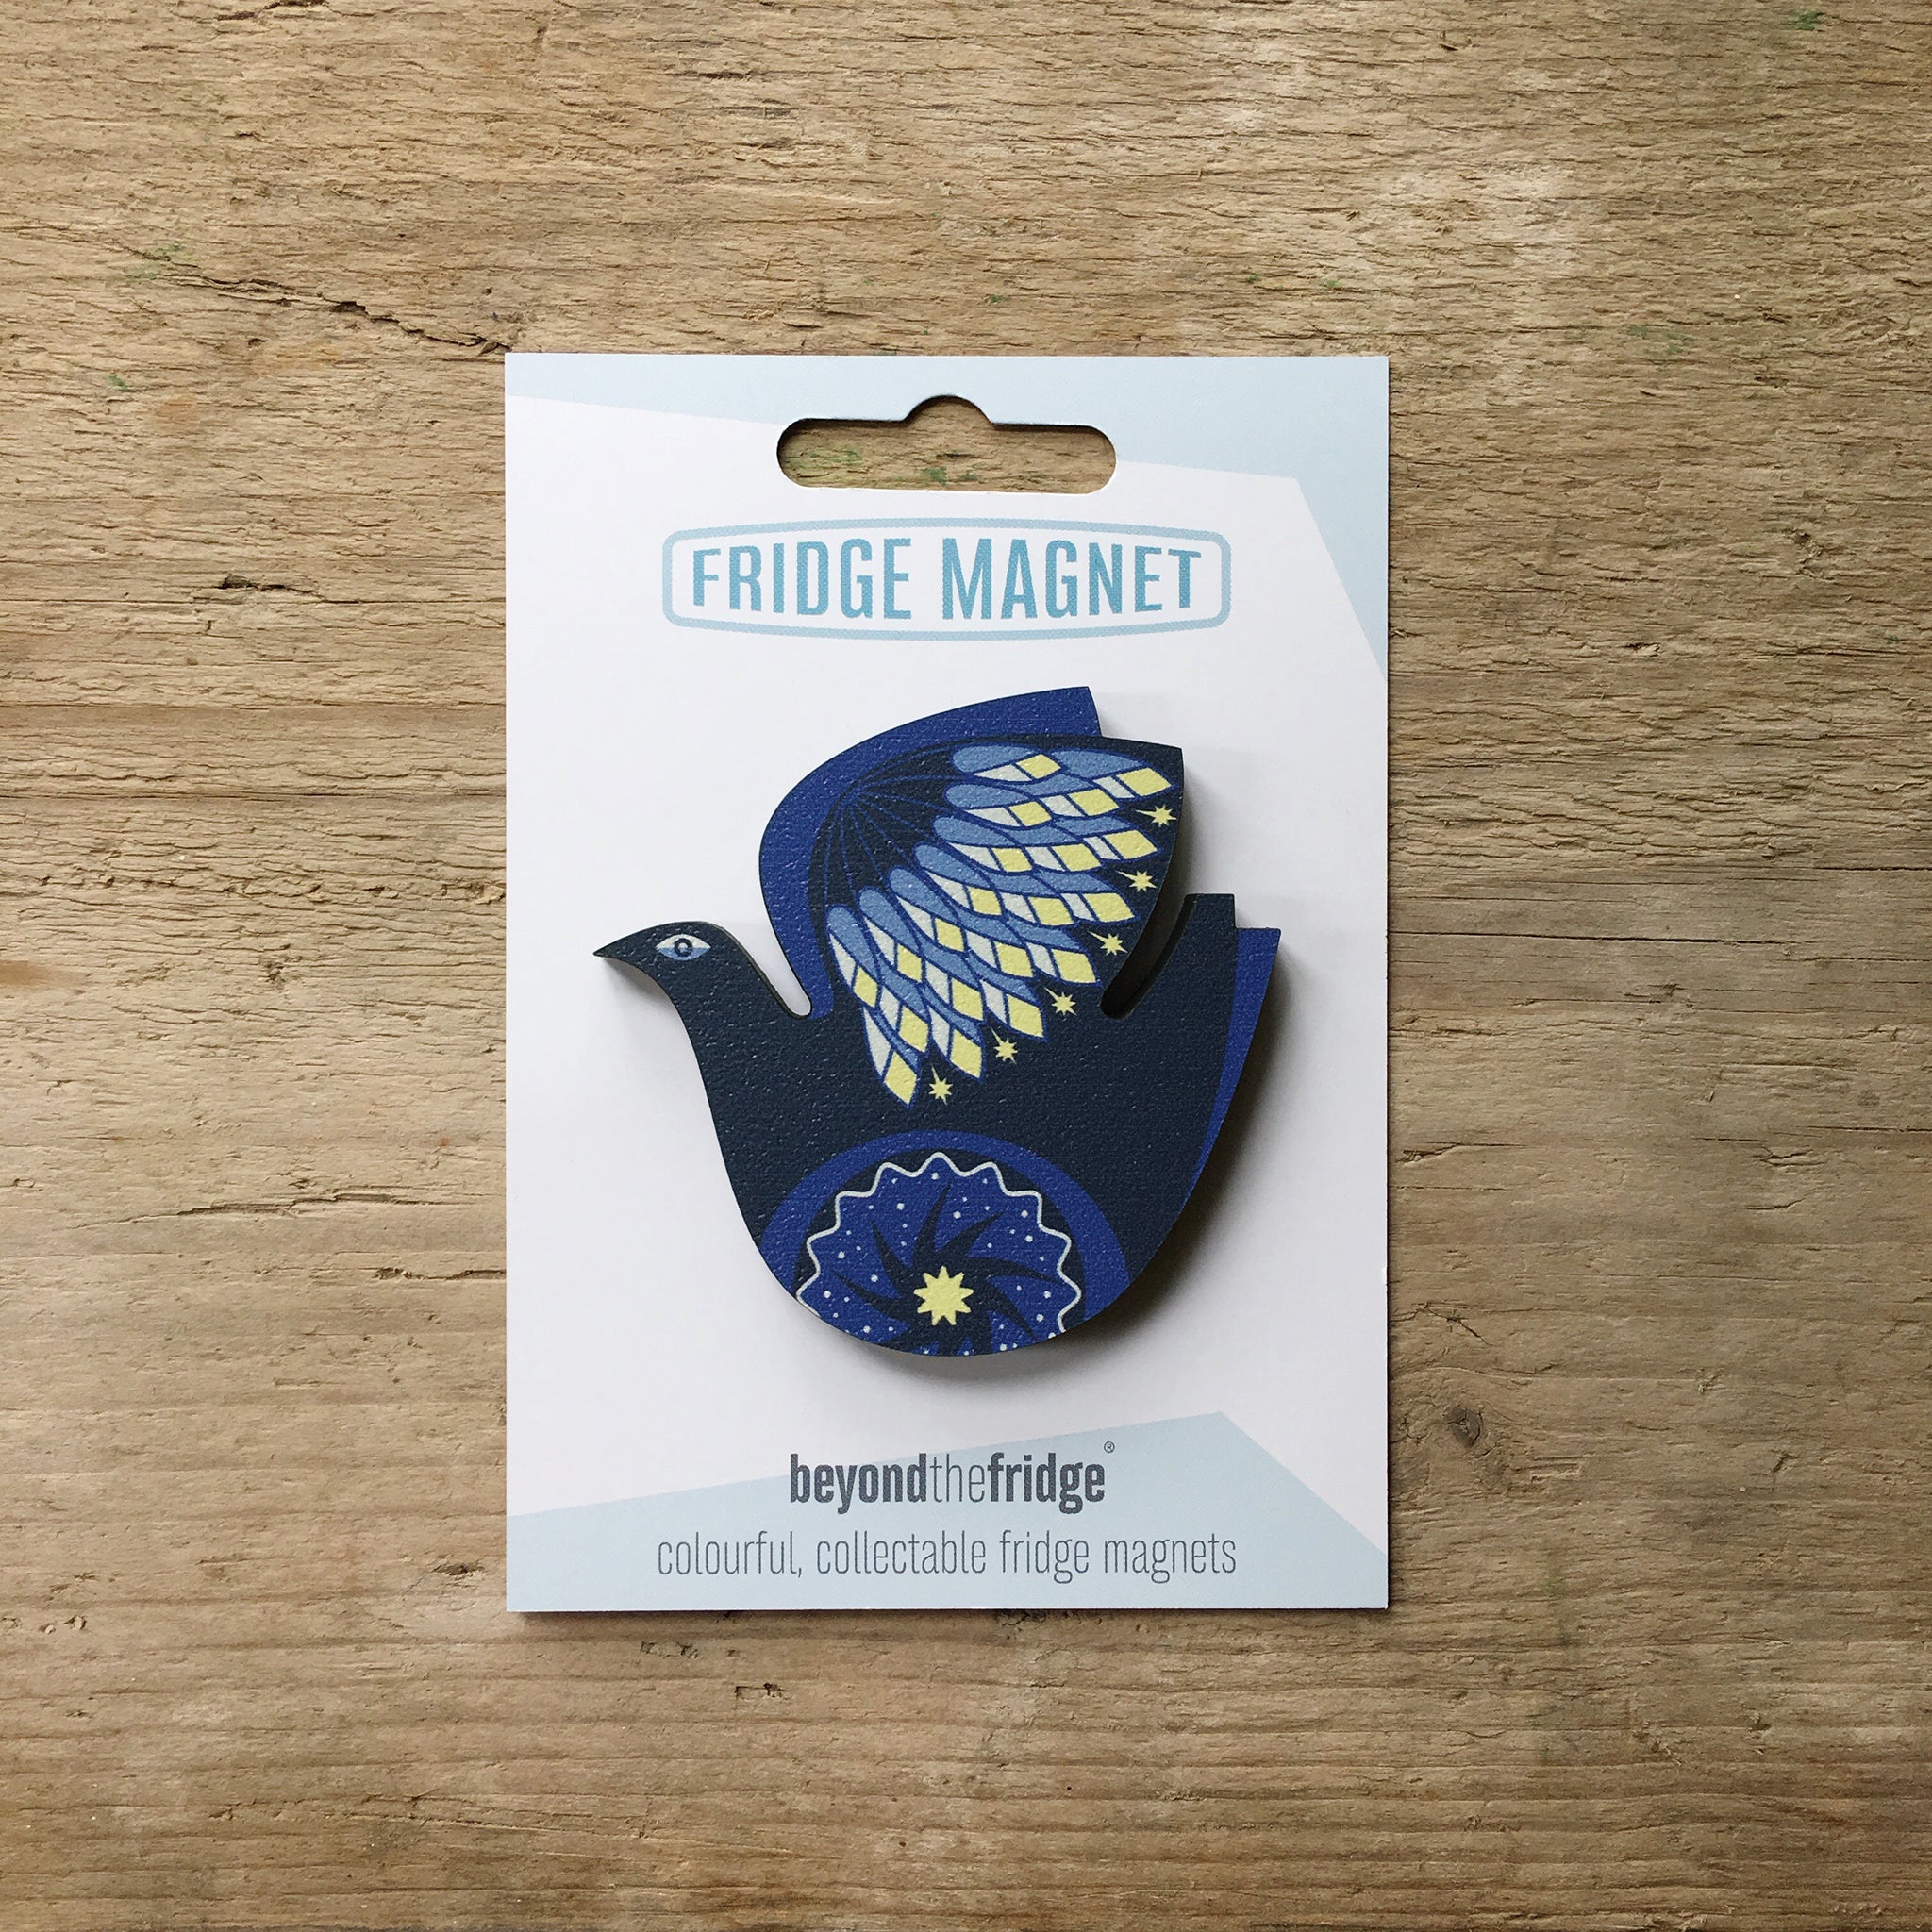 A retro night bird design plywood fridge magnet by Beyond the Fridge in it’s pack on a wooden background